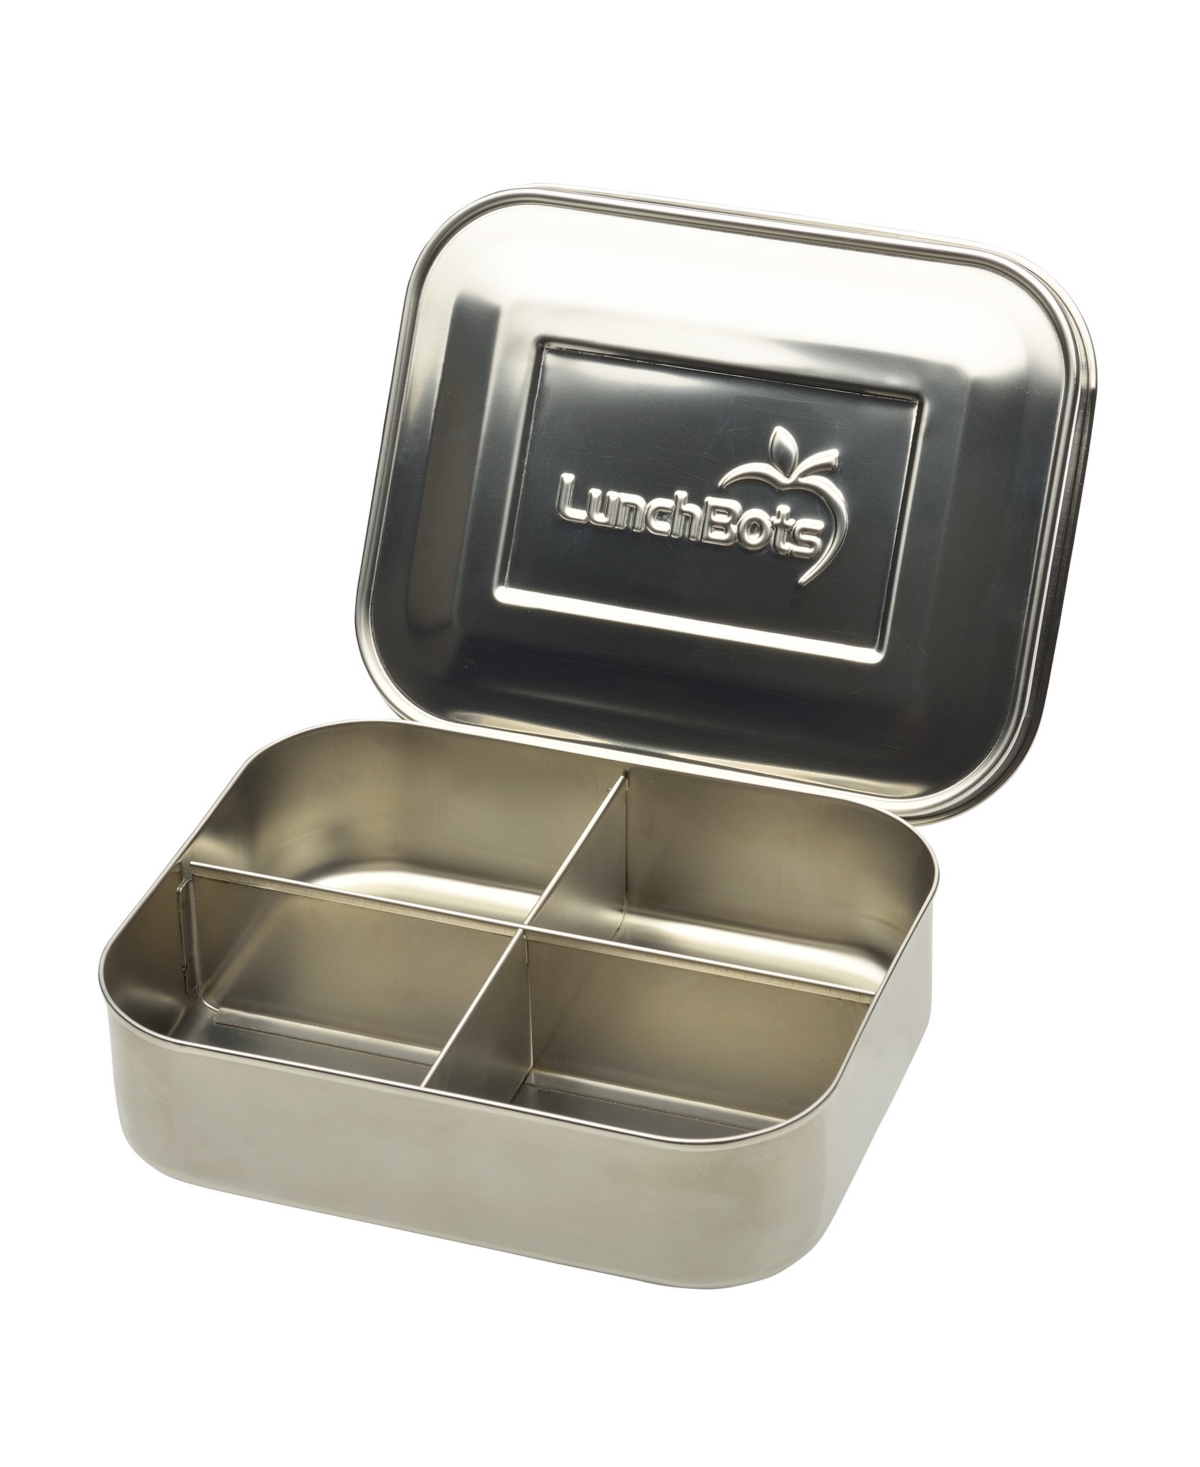 Lunchbots Stainless Steel Bento Lunch Box 4 Sections